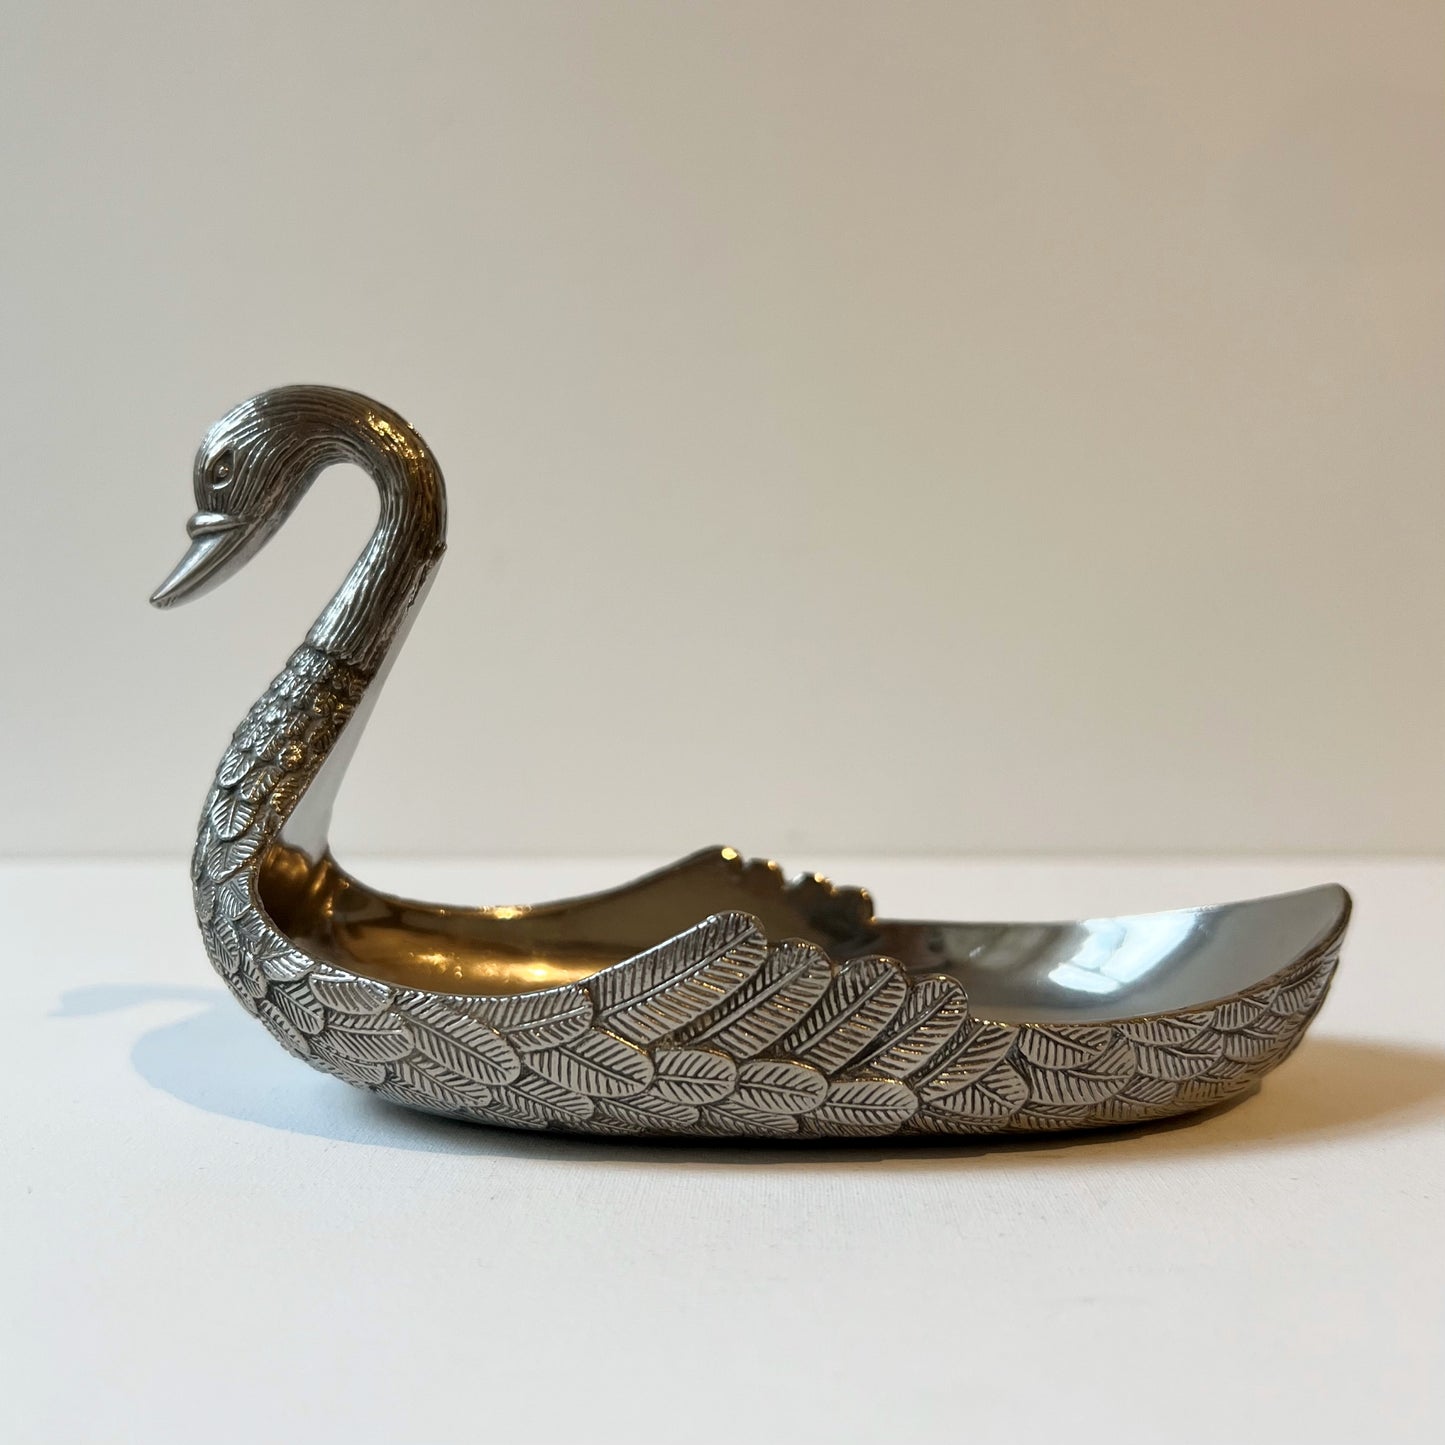 【Vintage】France - 1920-50s Swan Tray